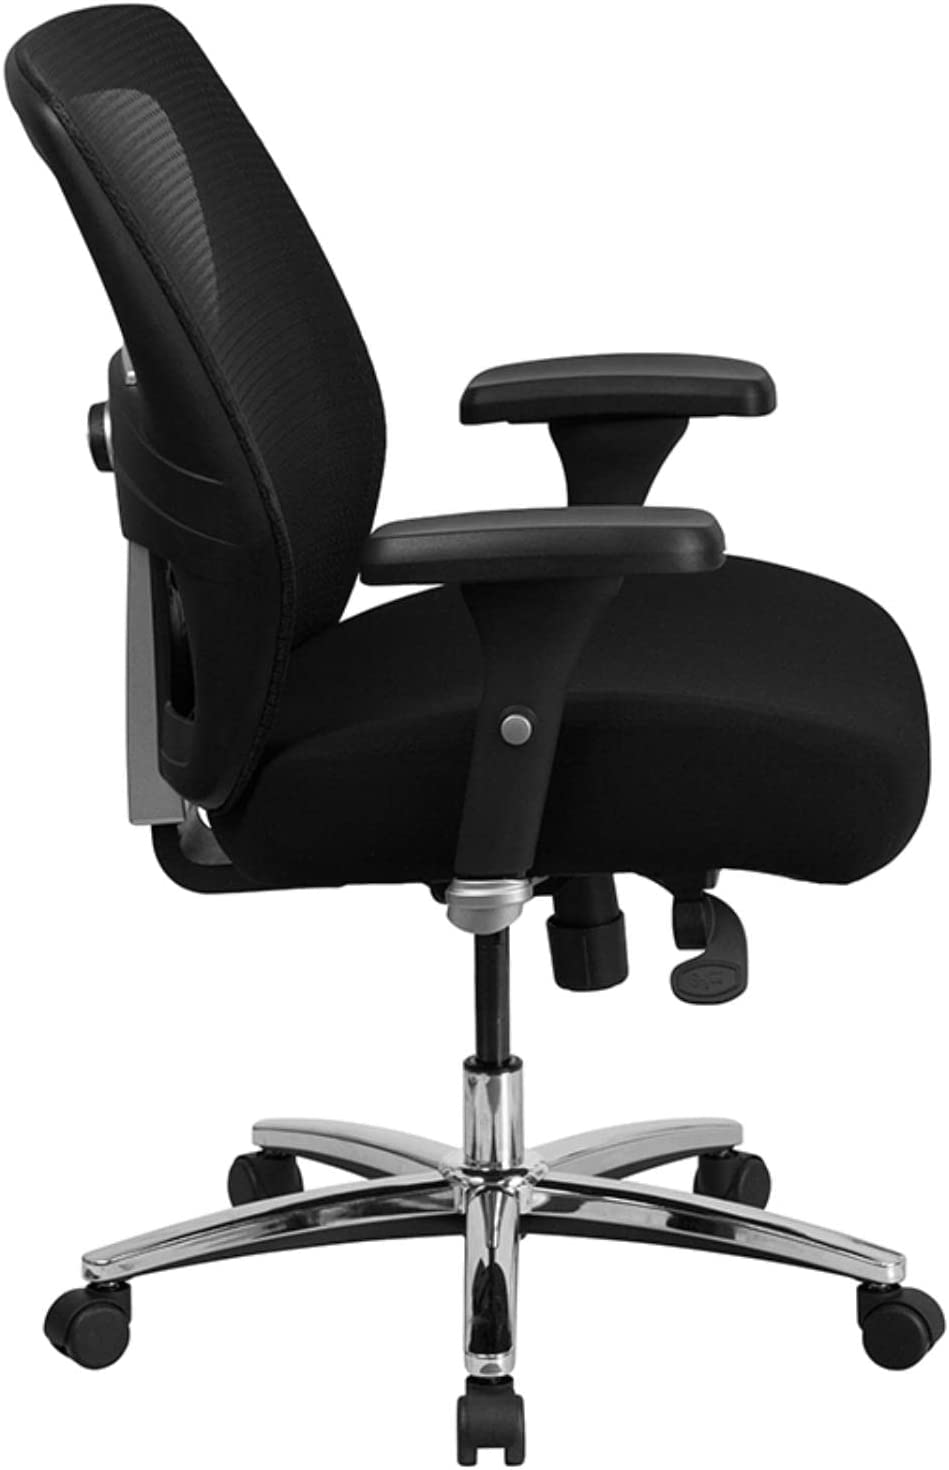 Flash Furniture HERCULES Series 24/7 Intensive Use Big &amp; Tall 500 lb. Rated Black Mesh Executive Ergonomic Office Chair with Ratchet Back